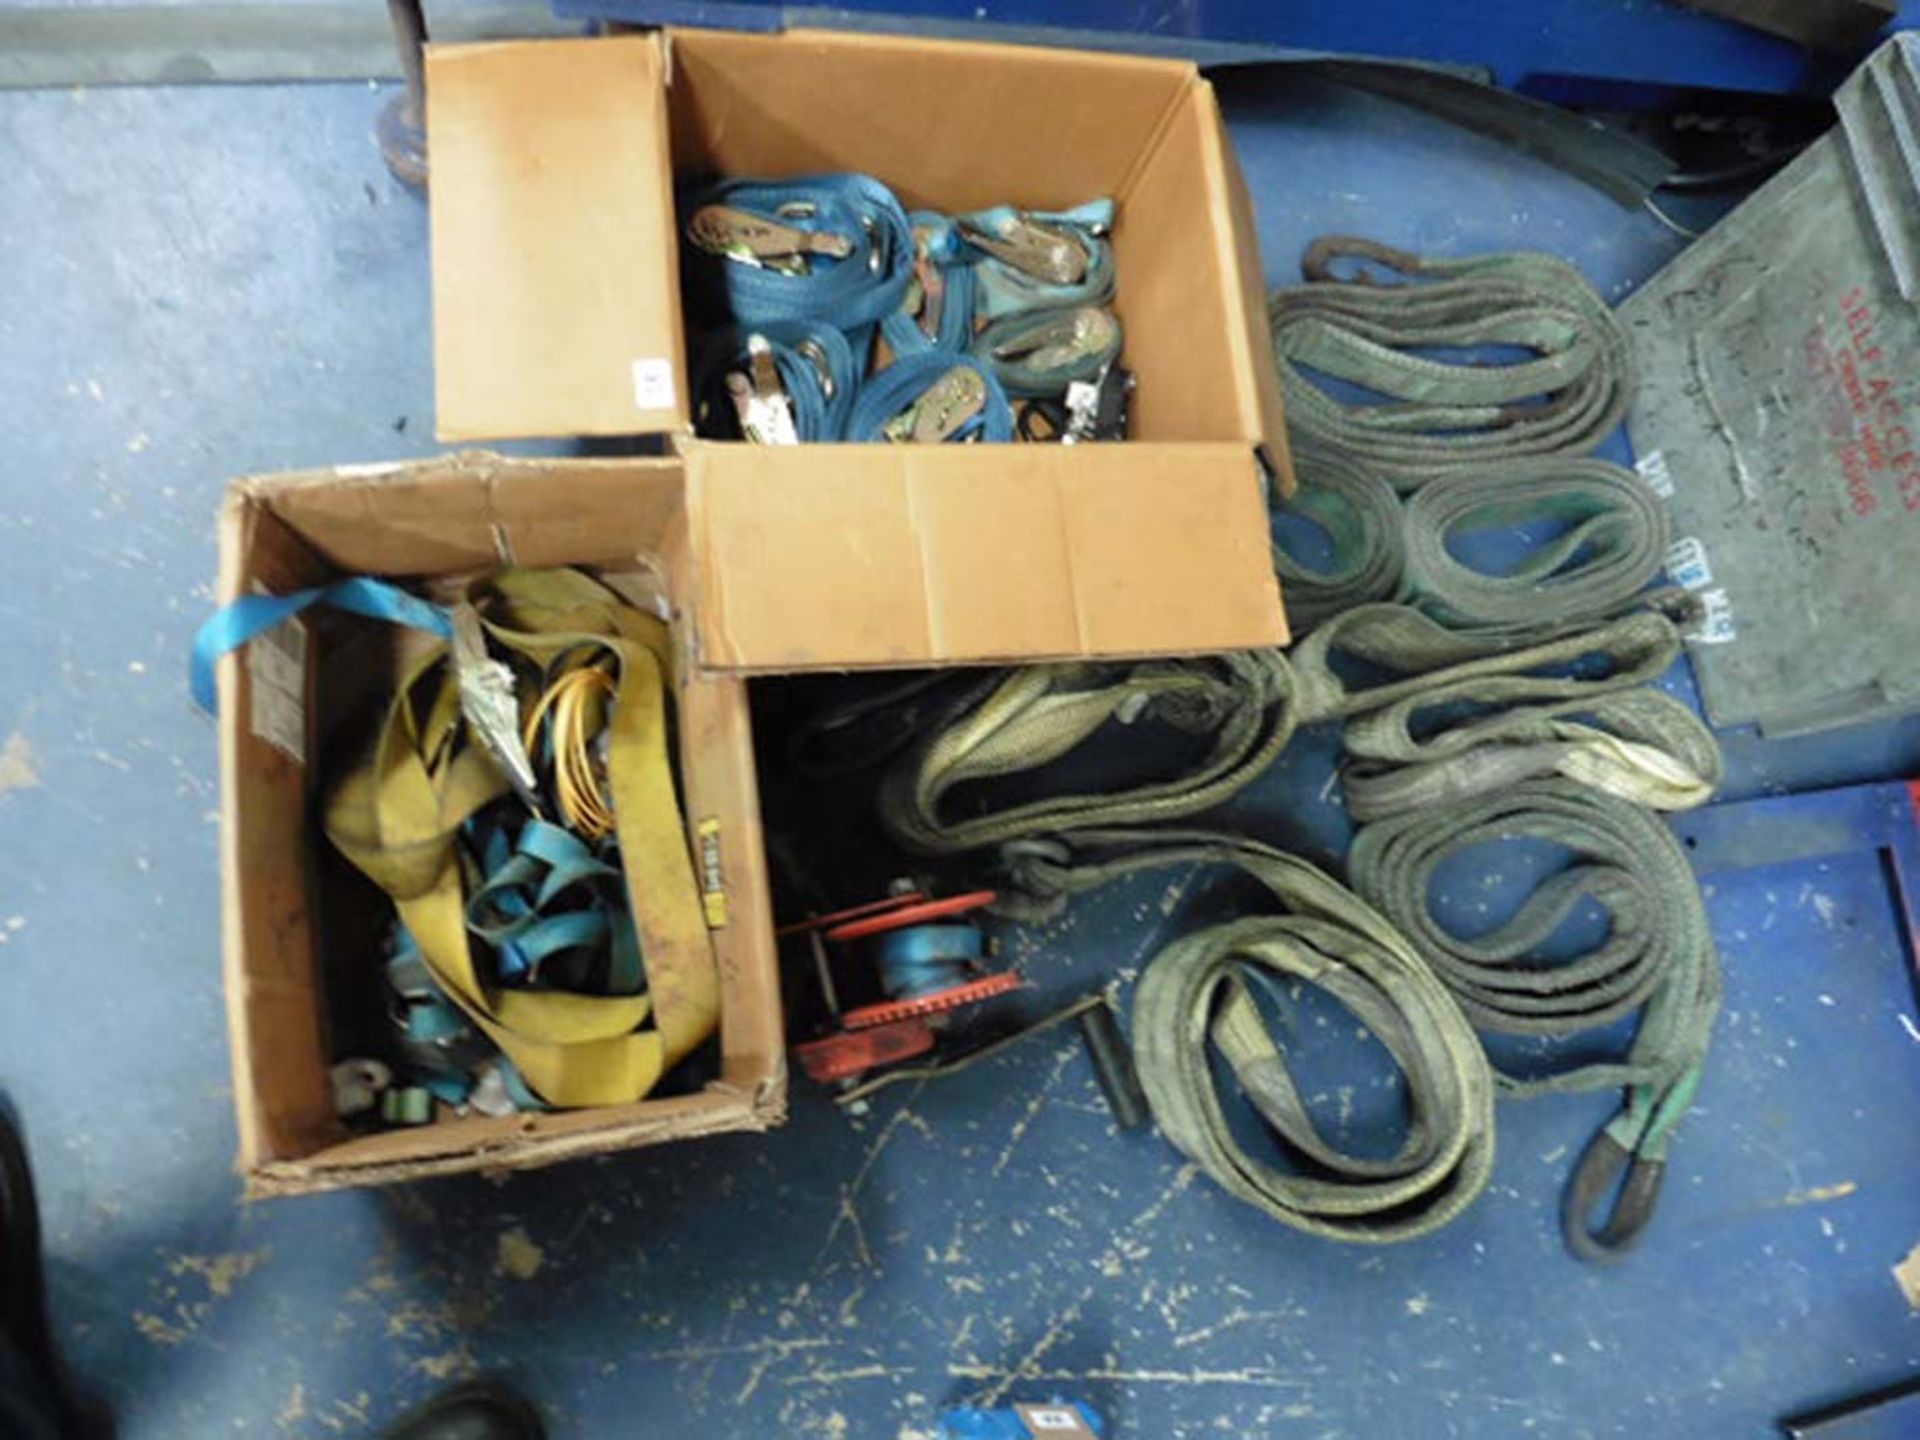 Quantity of lifting slings, straps and a winch